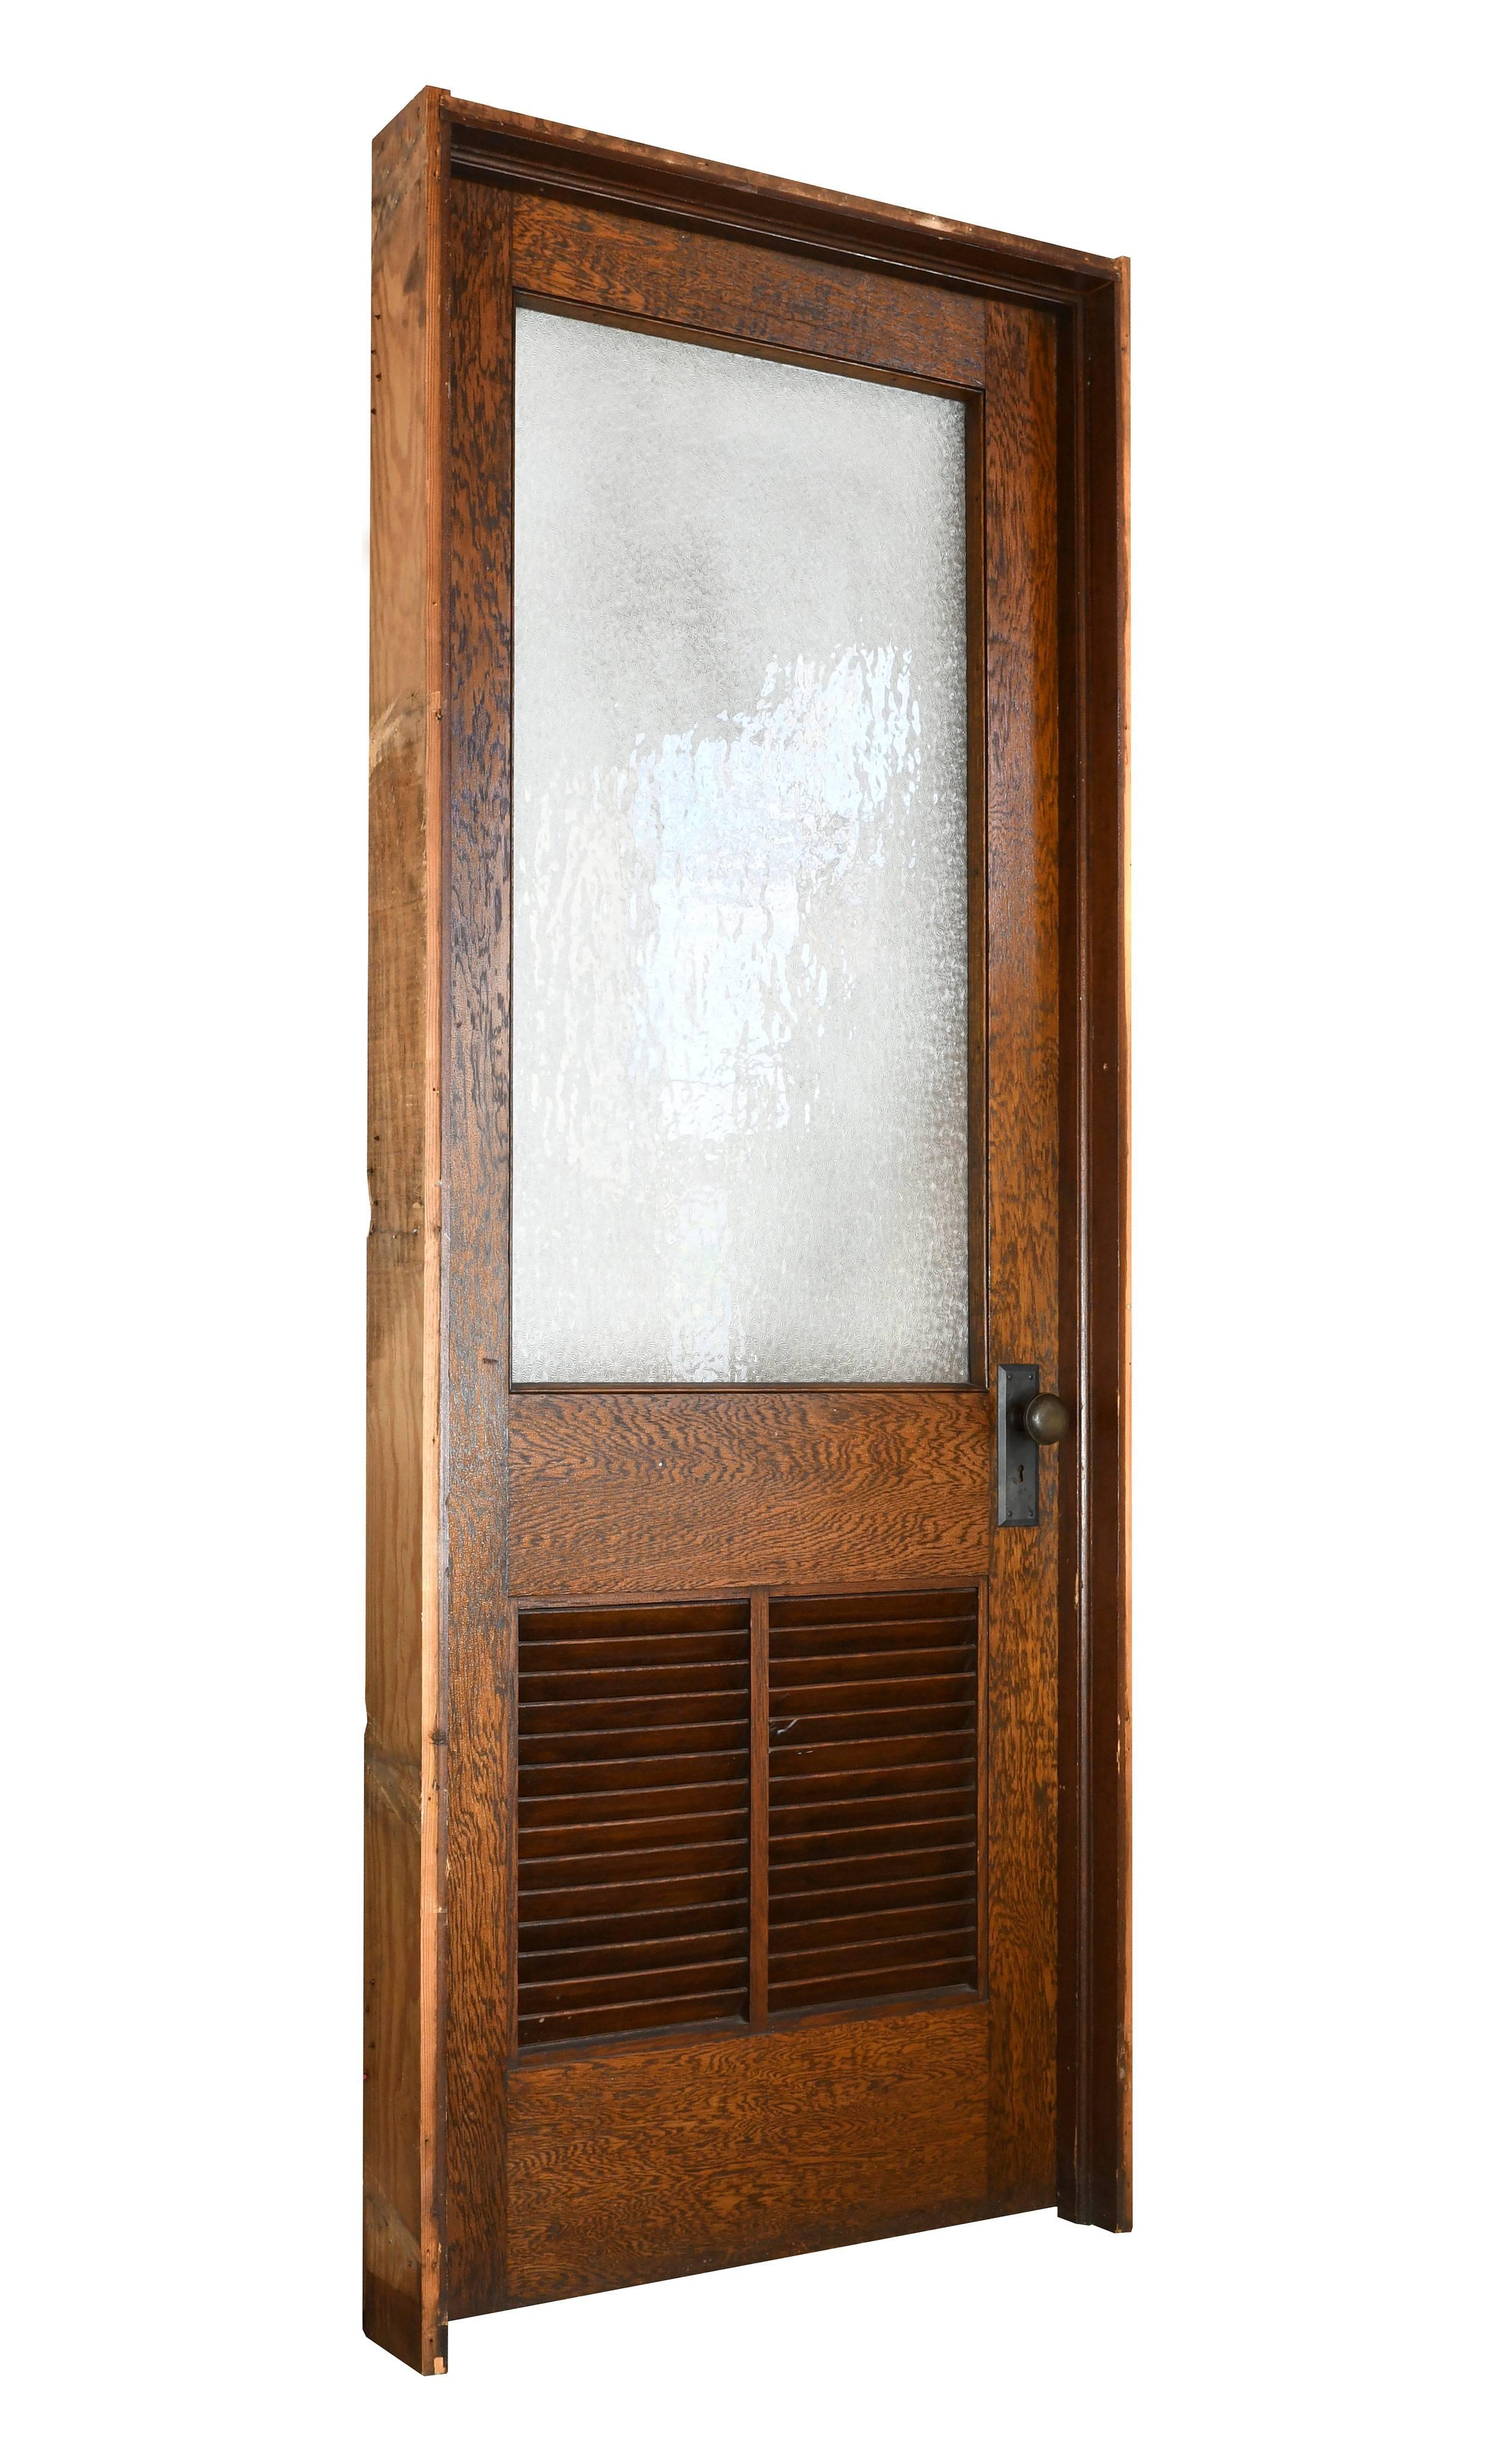 These oak schoolhouse doors feature highly contrasted wood grain, textured snowflake glass, wooden vent slats, and iron hardware. Originally from a schoolhouse in Youngstown, Ohio, these doors have stood the test of time with grace, and they're